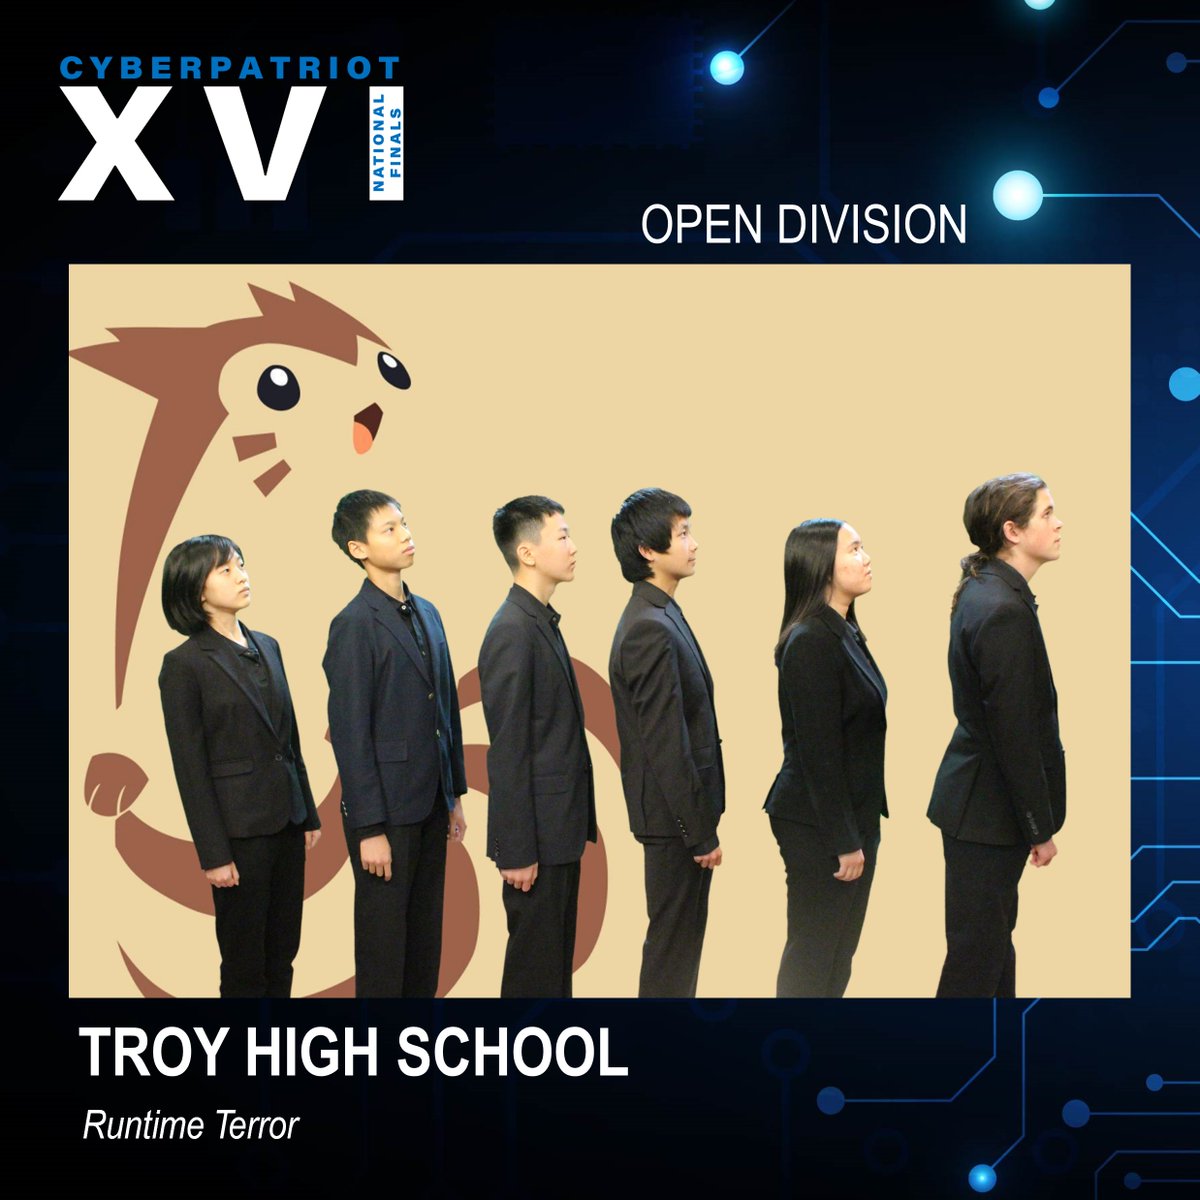 A round of applause for our next two Open Division teams competing at CP-XVI National Finals - We have Killer Queen from Rock Canyon High School (Highlands Ranch, CO) and Runtime Terror from Troy High School (Fullerton, CA). #CPXVIFinals